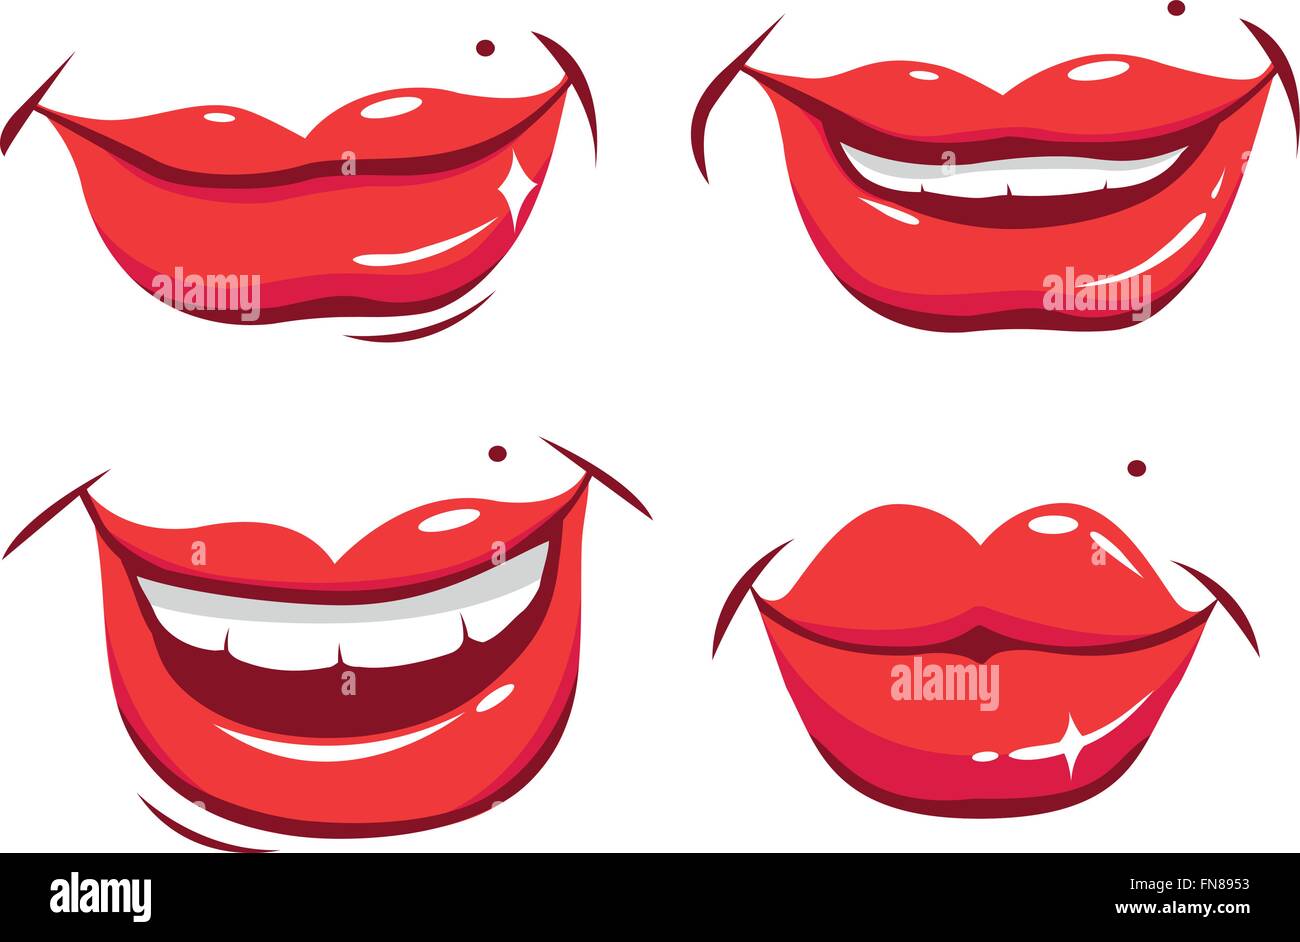 Lip - Mouth Cartoon - CleanPNG / KissPNG